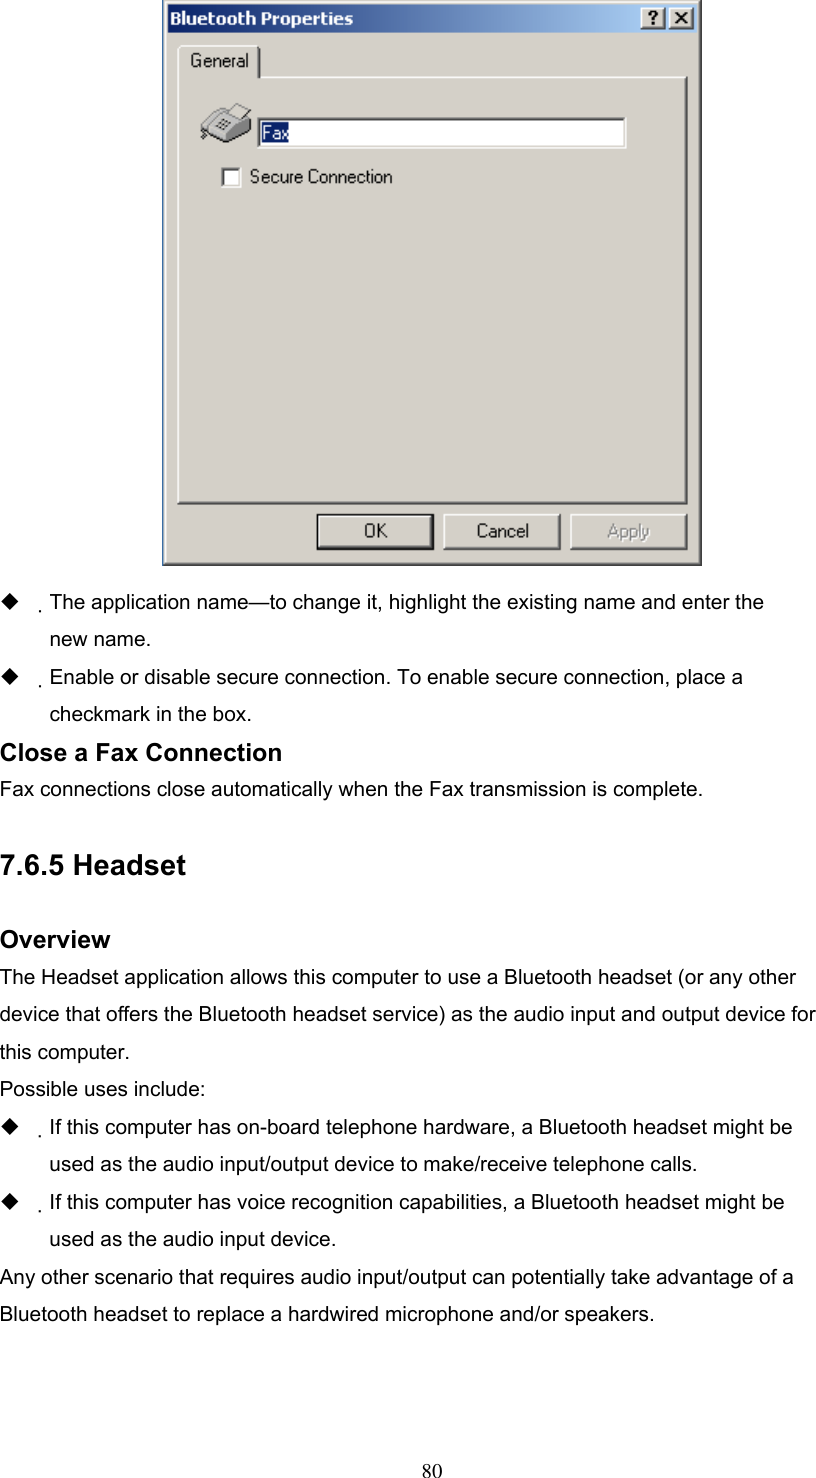    The application name—to change it, highlight the existing name and enter the new name.   Enable or disable secure connection. To enable secure connection, place a checkmark in the box. Close a Fax Connection Fax connections close automatically when the Fax transmission is complete.  7.6.5 Headset  Overview The Headset application allows this computer to use a Bluetooth headset (or any other device that offers the Bluetooth headset service) as the audio input and output device for this computer. Possible uses include:   If this computer has on-board telephone hardware, a Bluetooth headset might be used as the audio input/output device to make/receive telephone calls.   If this computer has voice recognition capabilities, a Bluetooth headset might be used as the audio input device. Any other scenario that requires audio input/output can potentially take advantage of a Bluetooth headset to replace a hardwired microphone and/or speakers.    80 